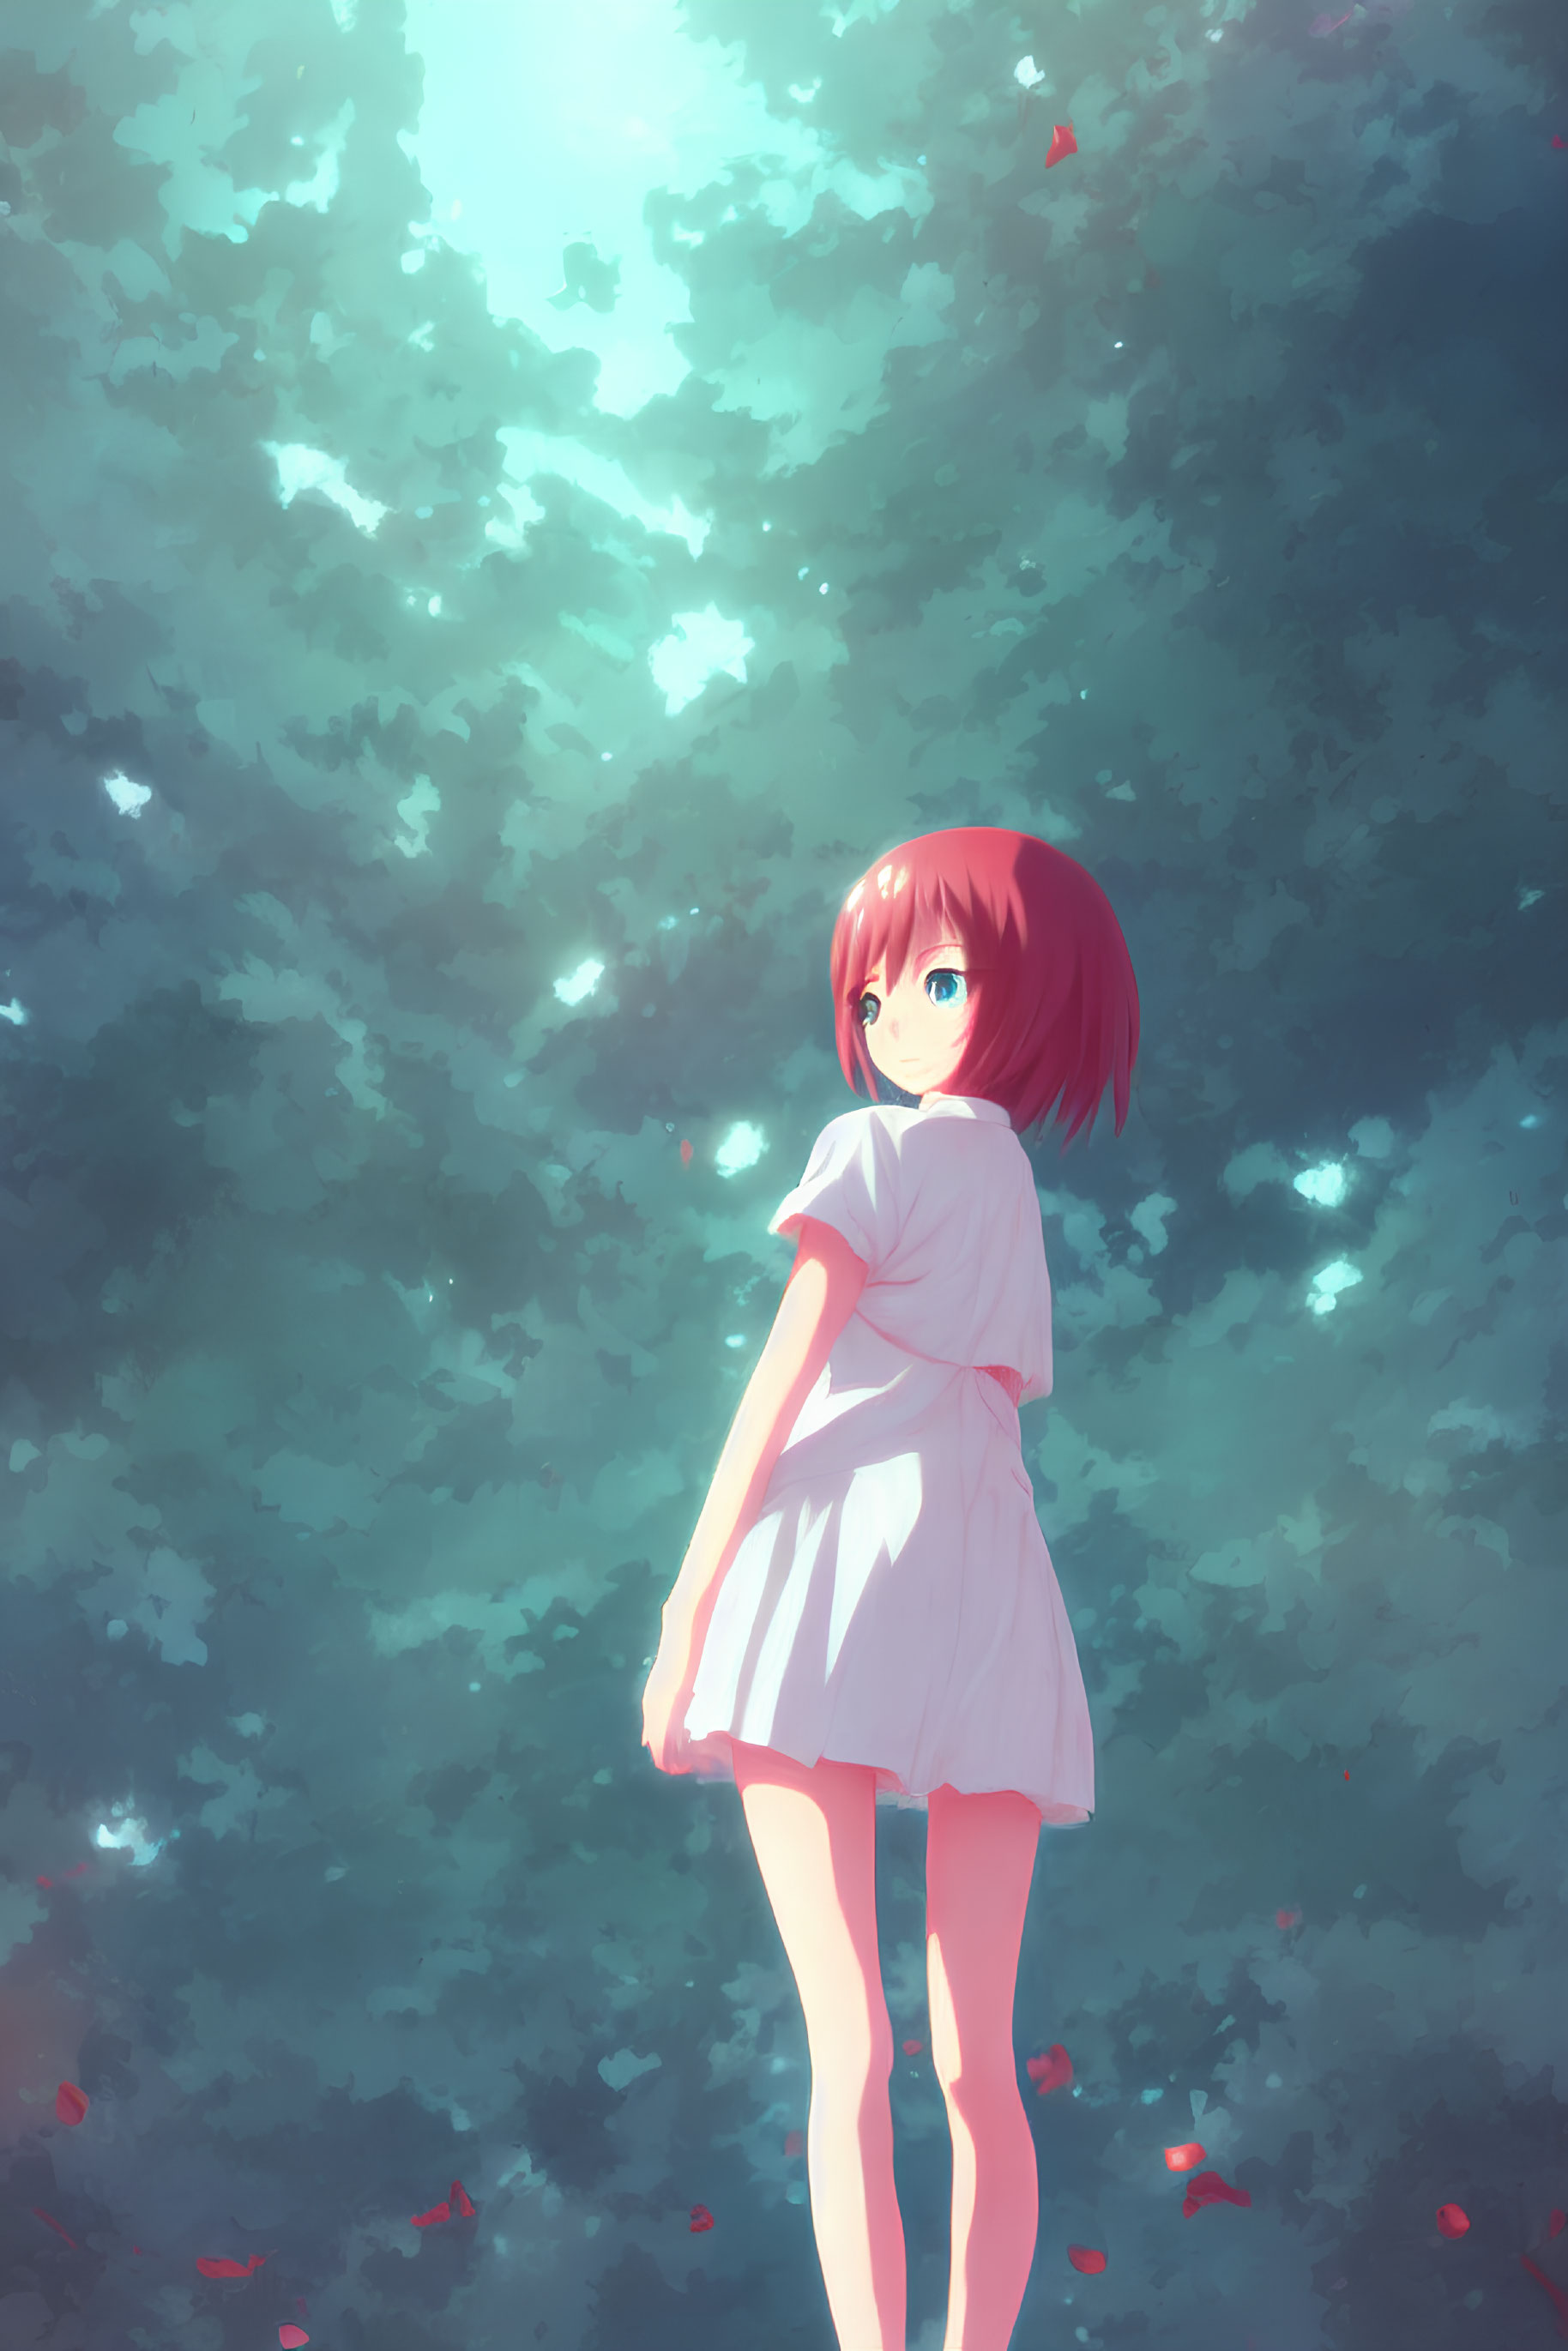 Young girl with red hair in white dress standing in forest with sunlit foliage and red petals.